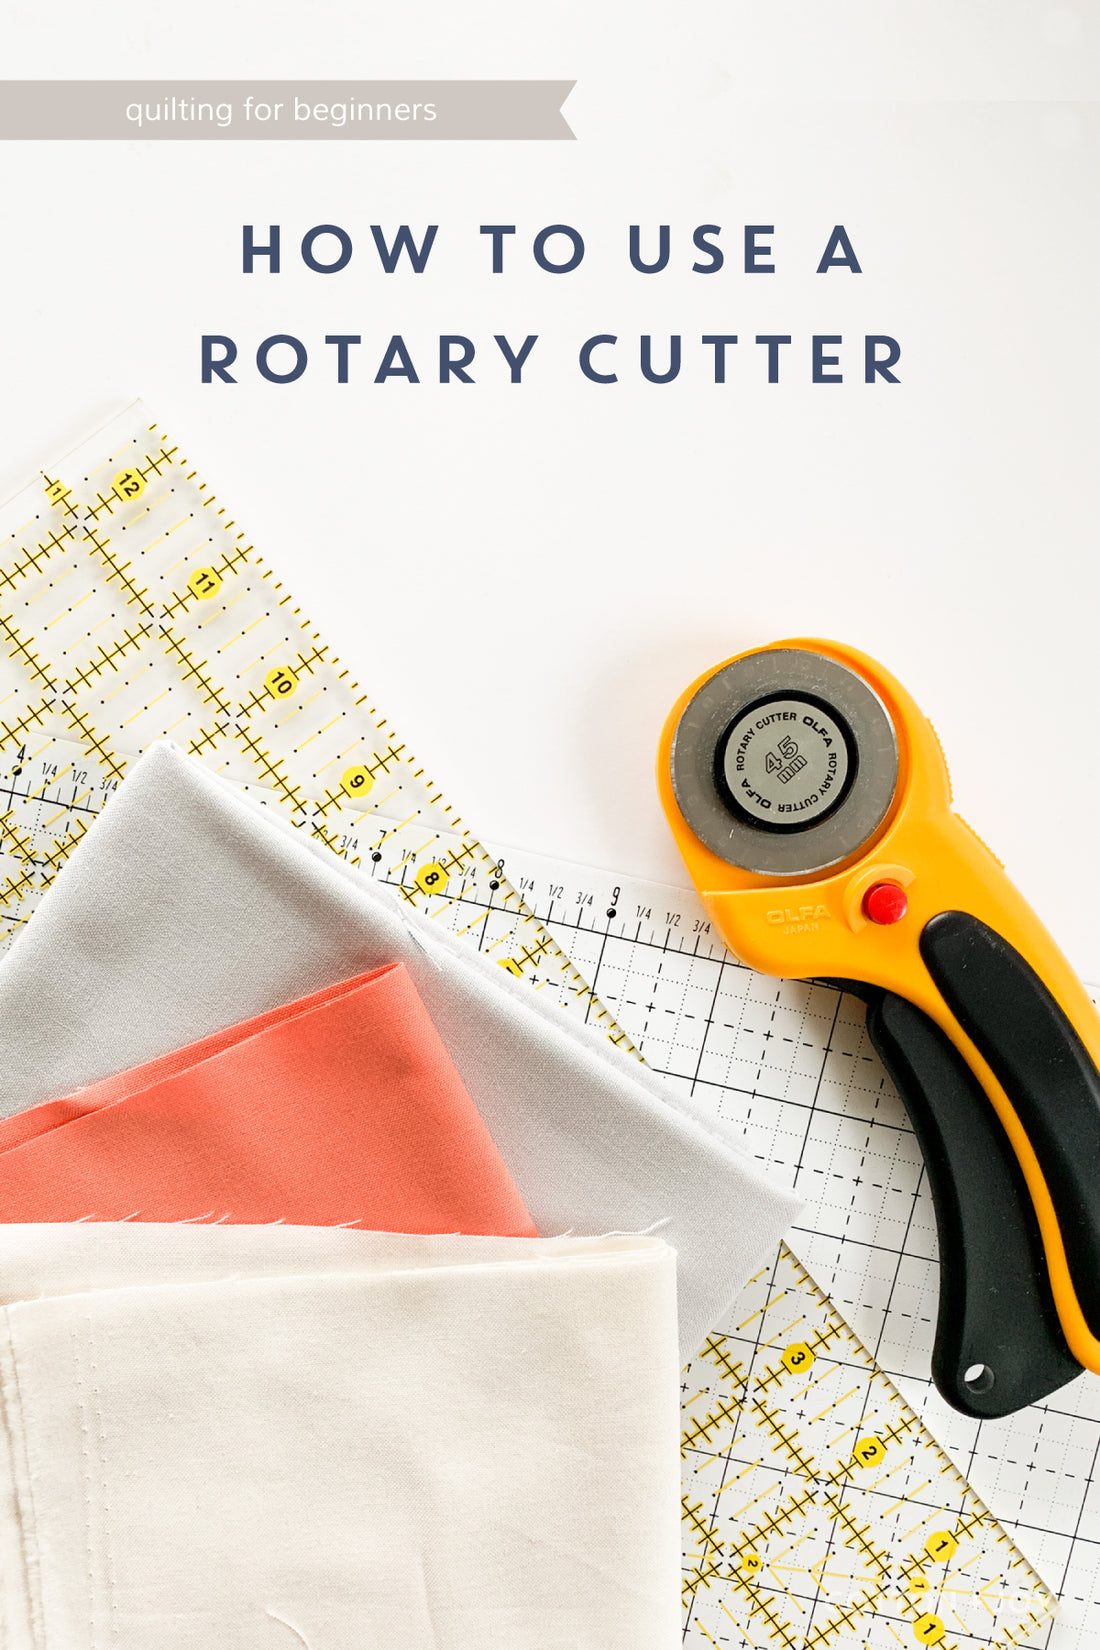 How To (Properly) Use A Rotary Cutter